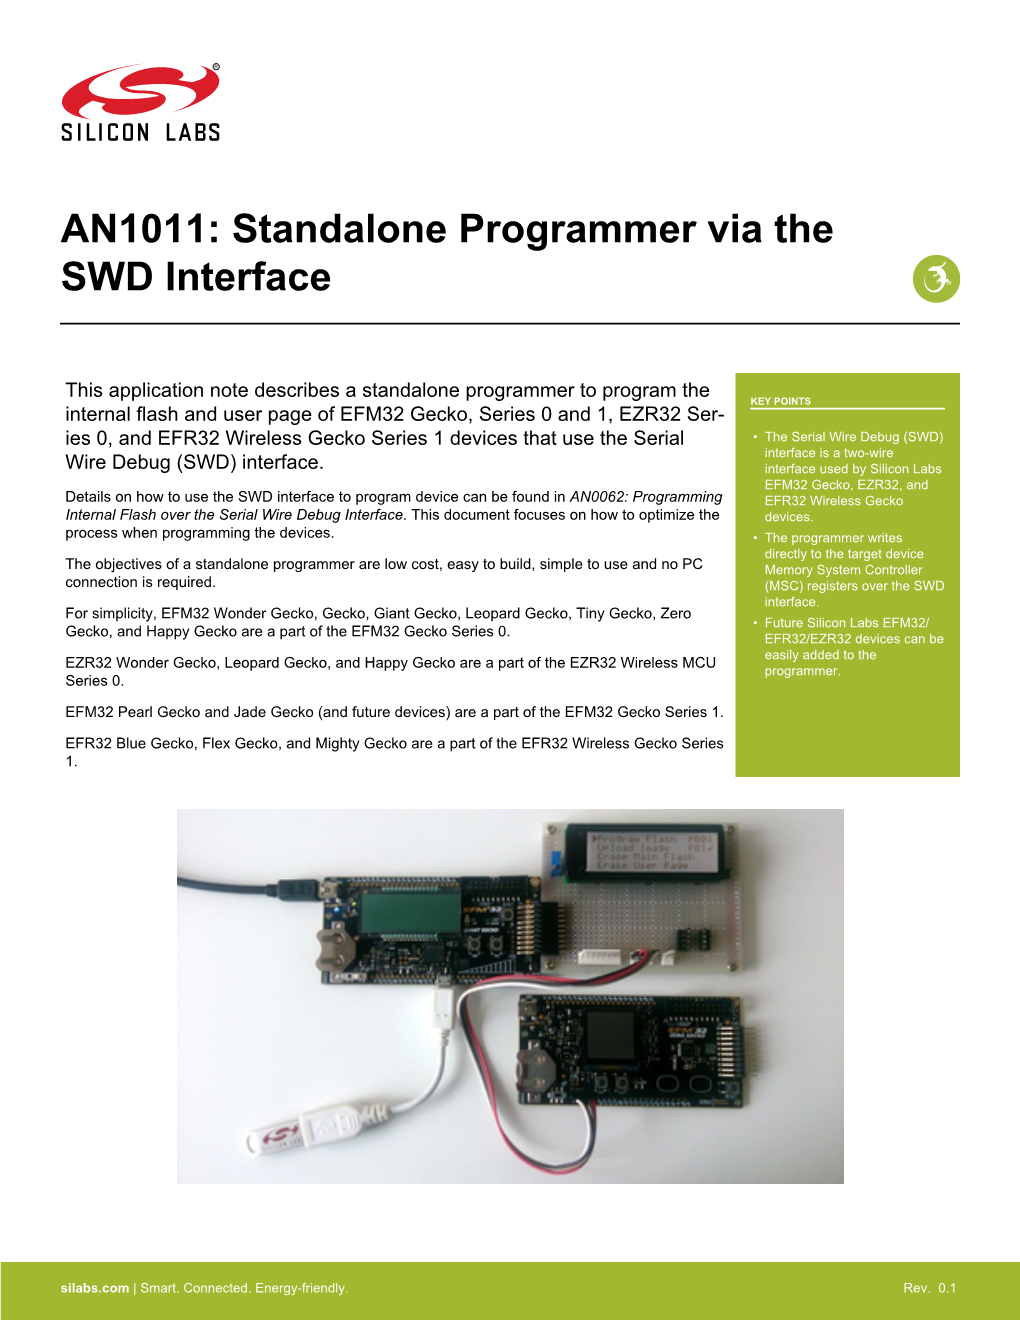 AN1011: Standalone Programmer Via the SWD Interface